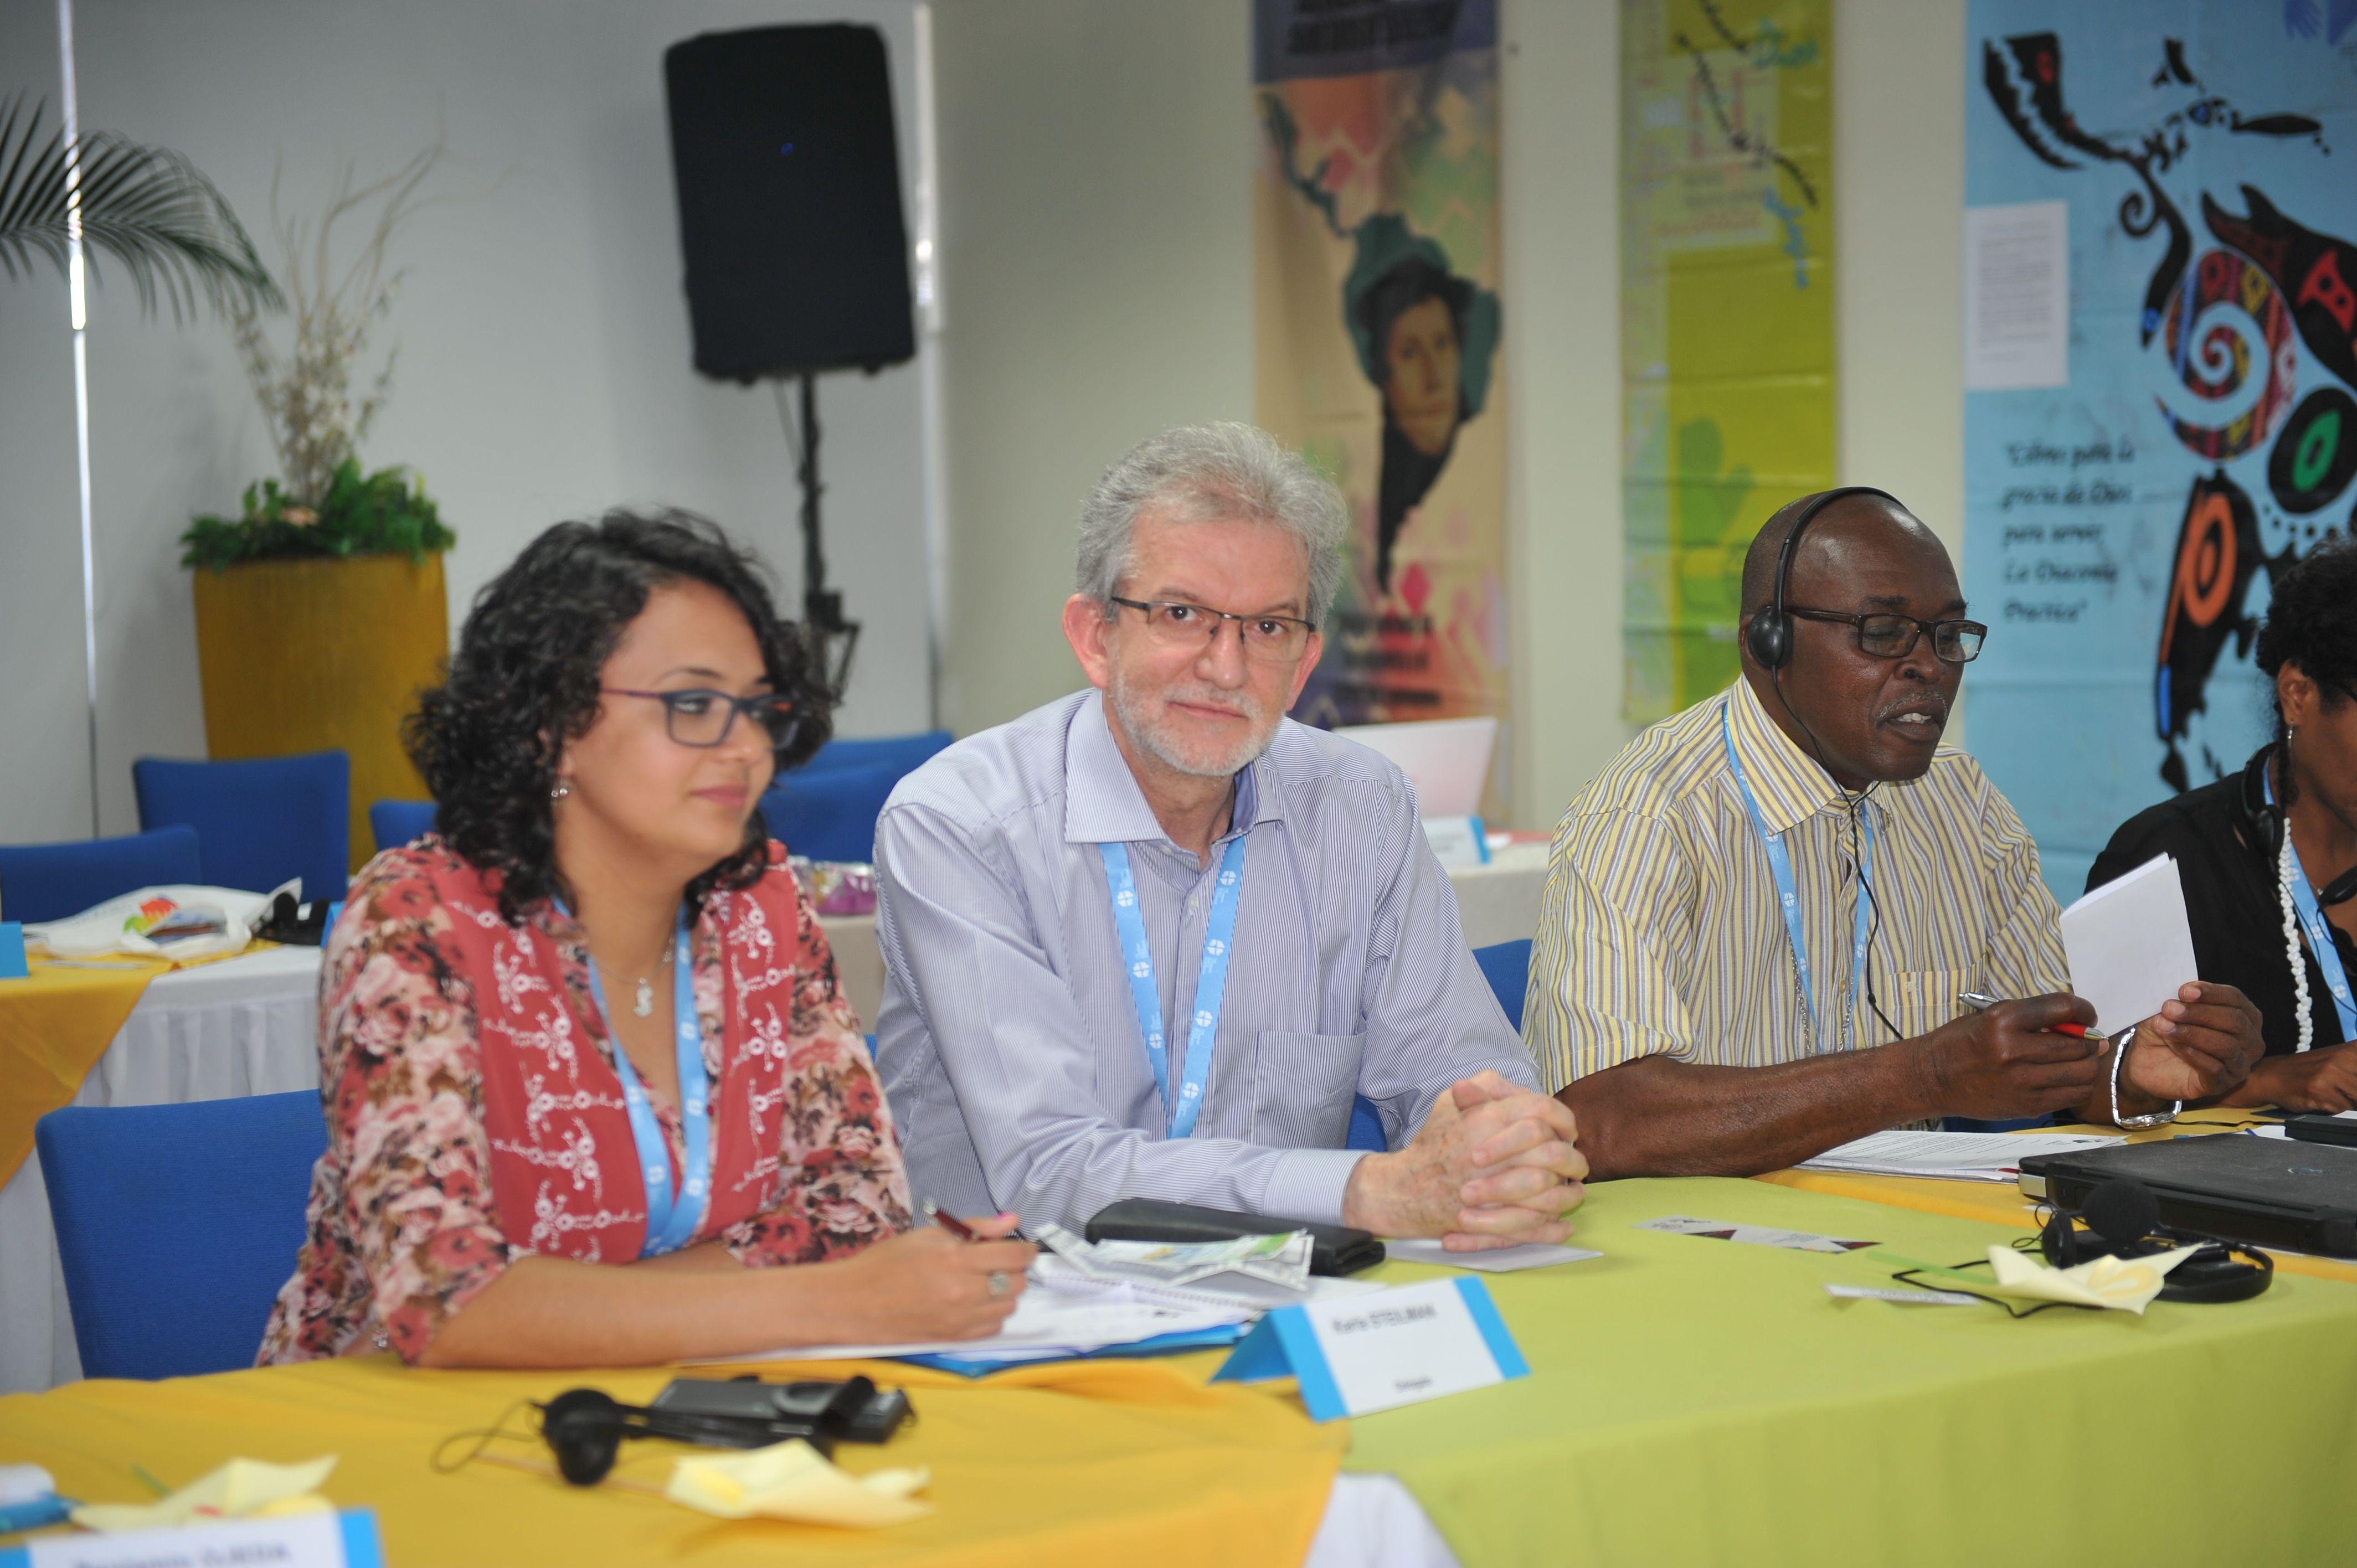 In the face of myriad social crises, Lutherans as a Christian community can still say âwe are not perfectâ but also offer space for dialogue and nurturing a sense of being together in communion,â said IECLB President , Rev. Dr Nestor Paulo Friedrich (middle). Photo: LWF/P. Cuyatti